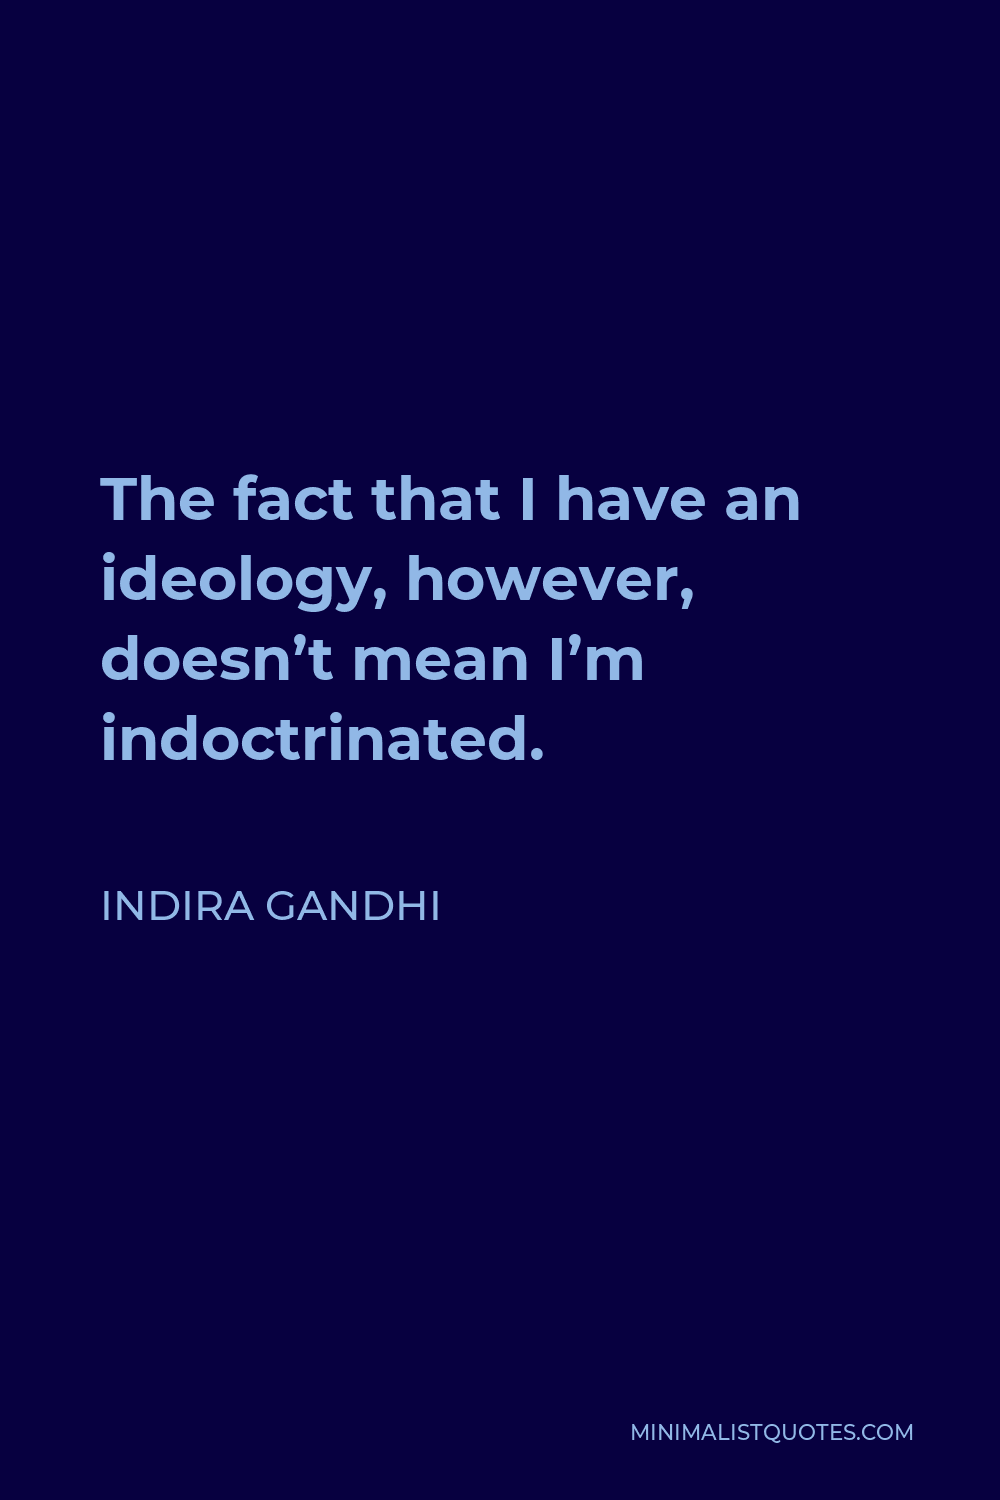 Indira Gandhi Quote - The fact that I have an ideology, however, doesn’t mean I’m indoctrinated.